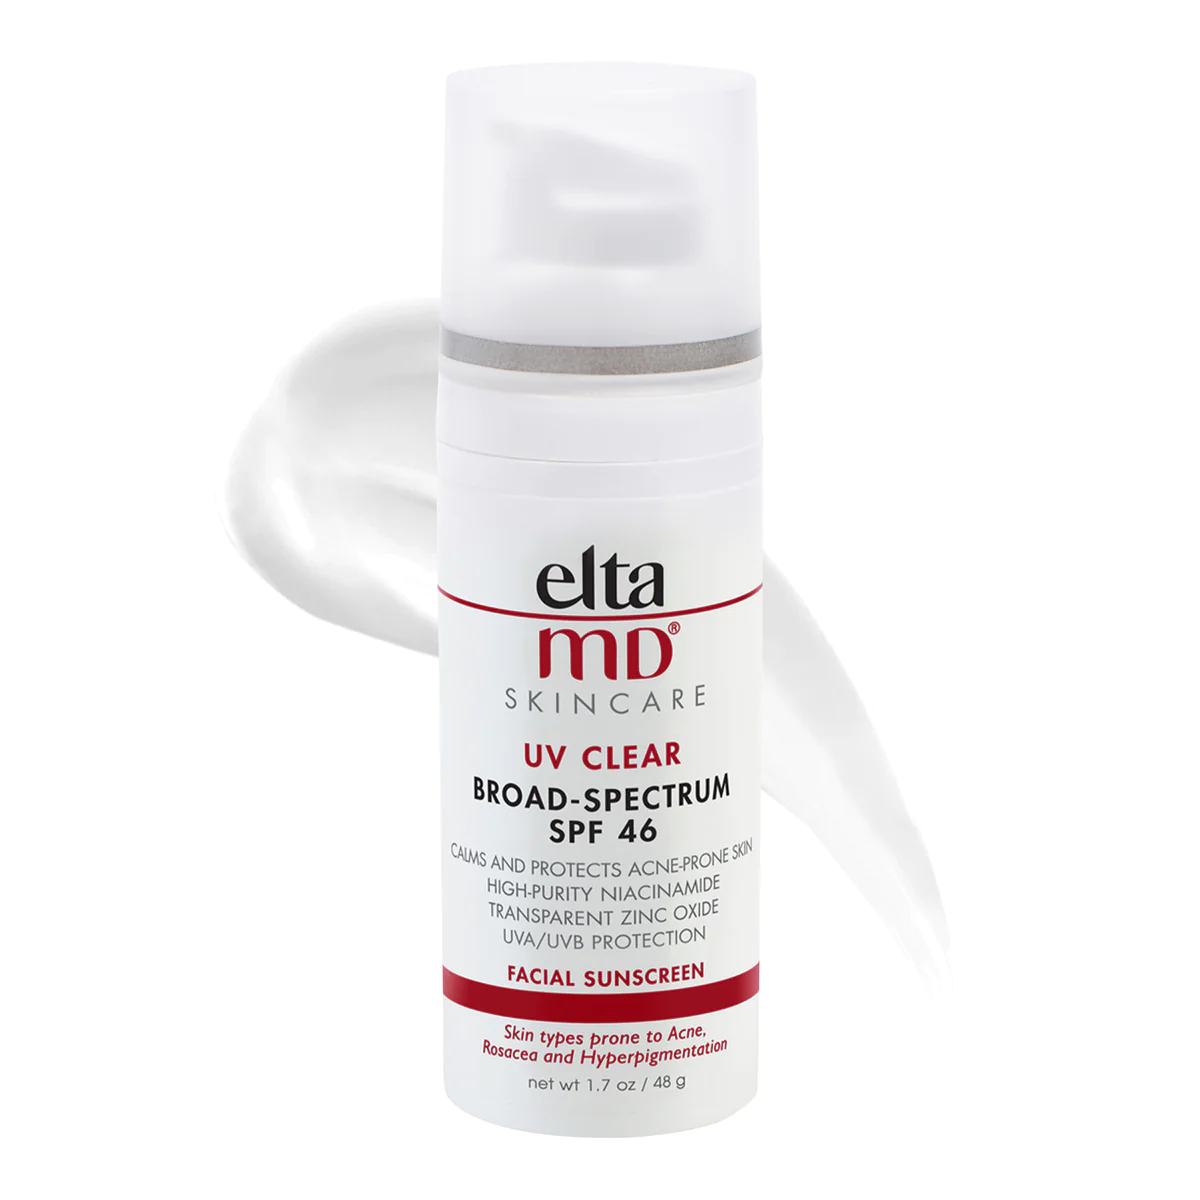 FEMMENORDIC's choice in the Elta MD Sheer vs Clear sunscreen comparison, the Elta MD UV Clear Facial Sunscreen